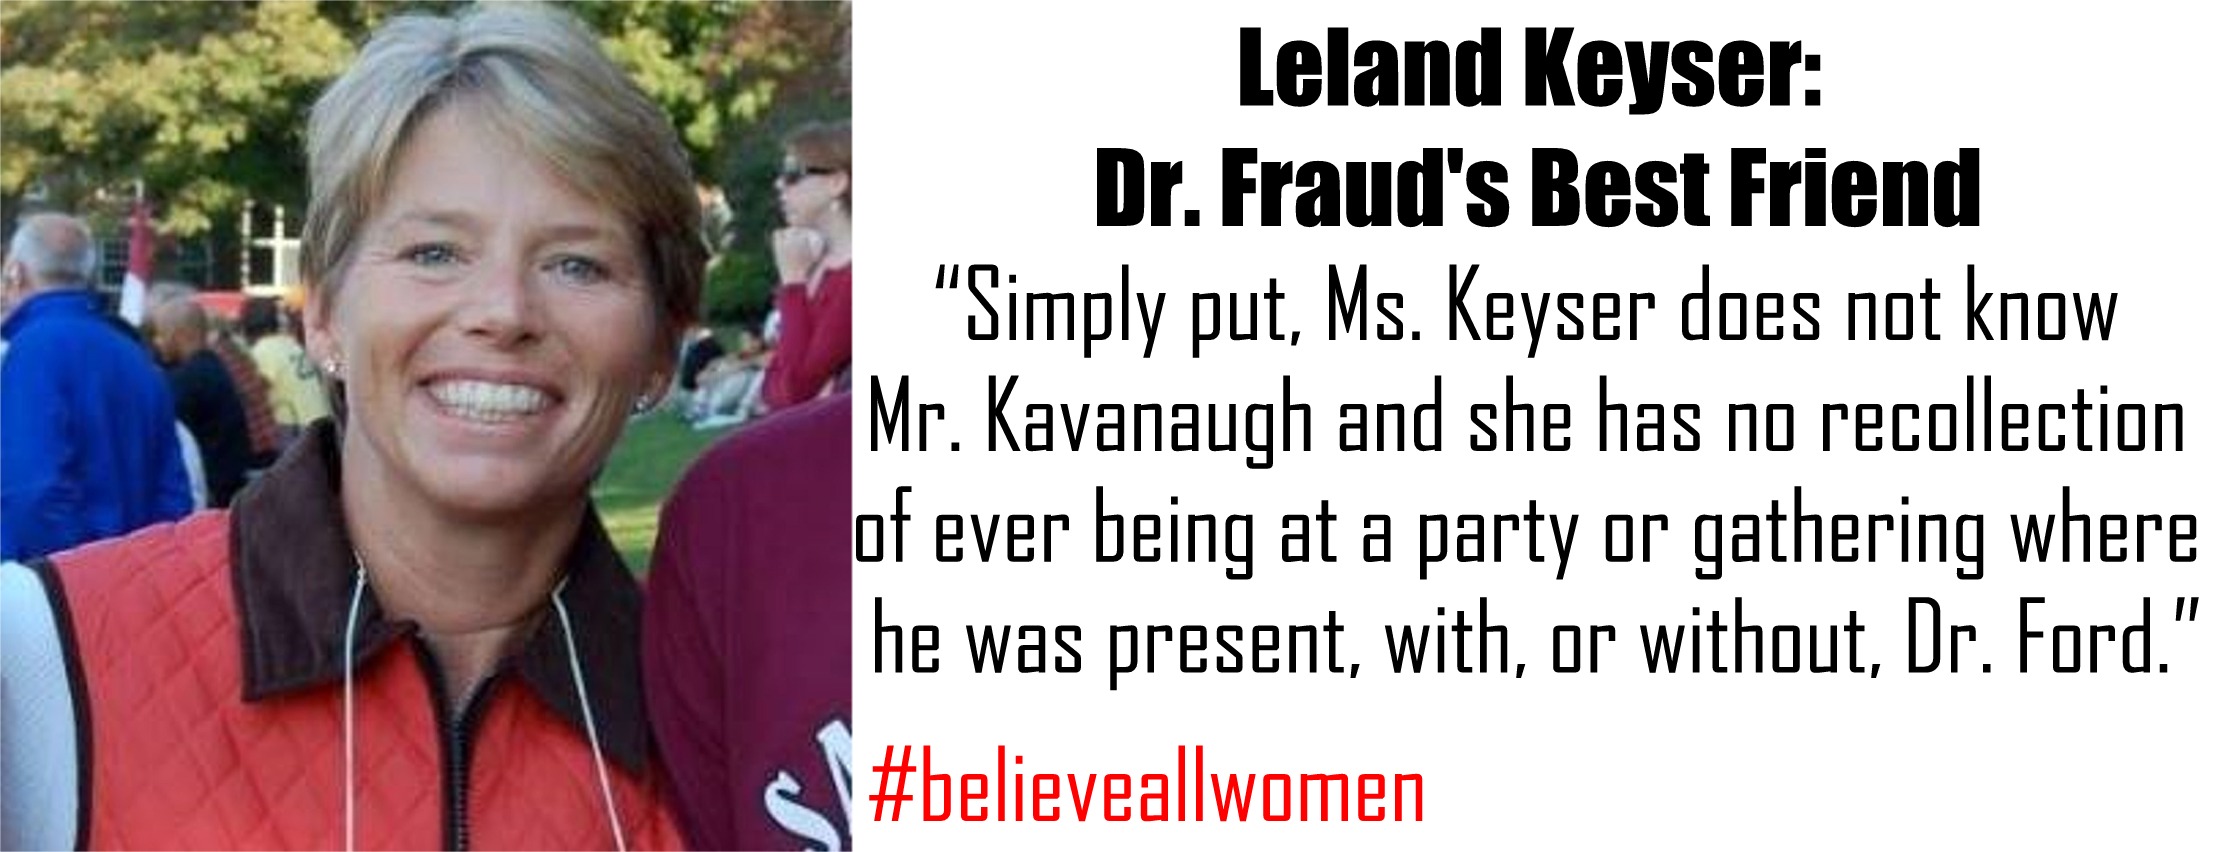 smile - Leland Keyser Dr. Fraud's Best Friend "Simply put, Ms. Keyser does not know Mr. Kavanaugh and she has no recollection of ever being at a party or gathering where he was present, with, or without, Dr. Ford."